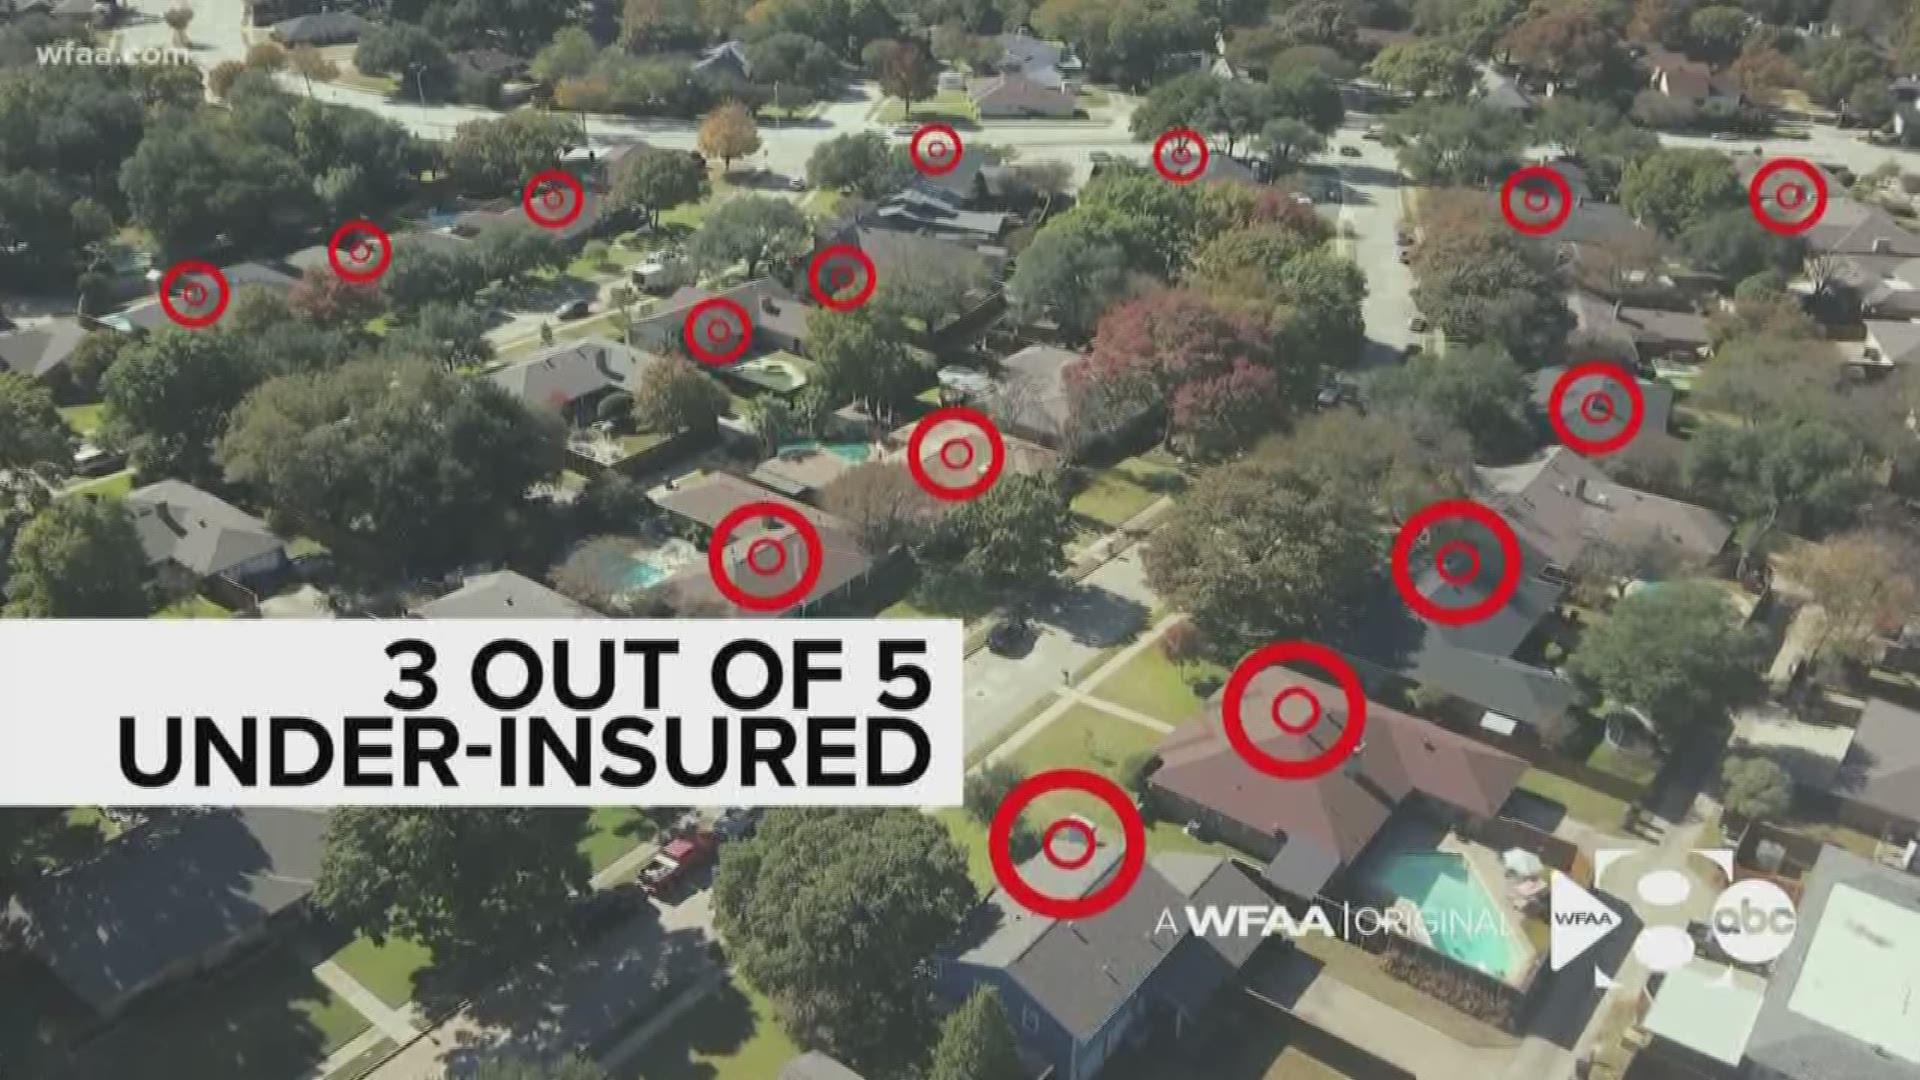 Statistics show three out of every five homes is underinsured. Are you one of the three?